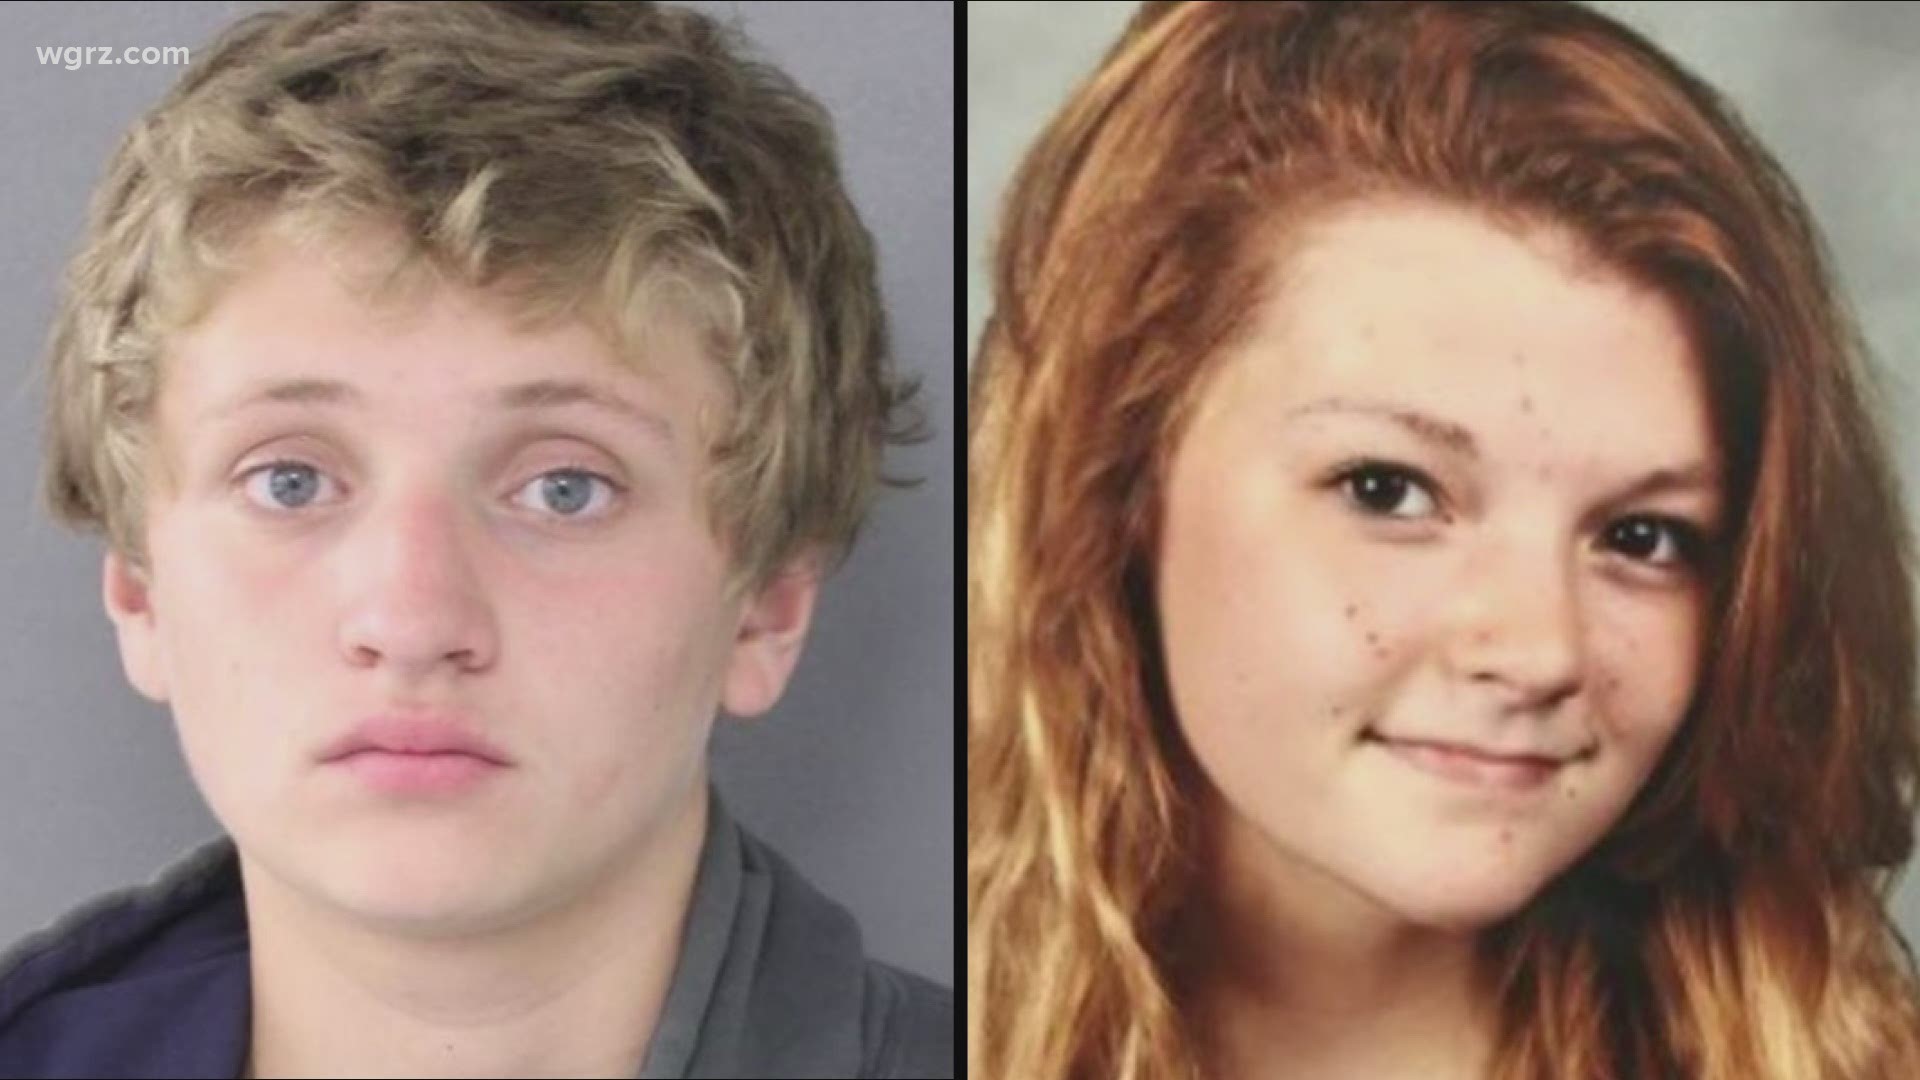 Two teenage parents described as runaways by the Orleans County Sheriff’s Office ran off after leaving their baby behind.